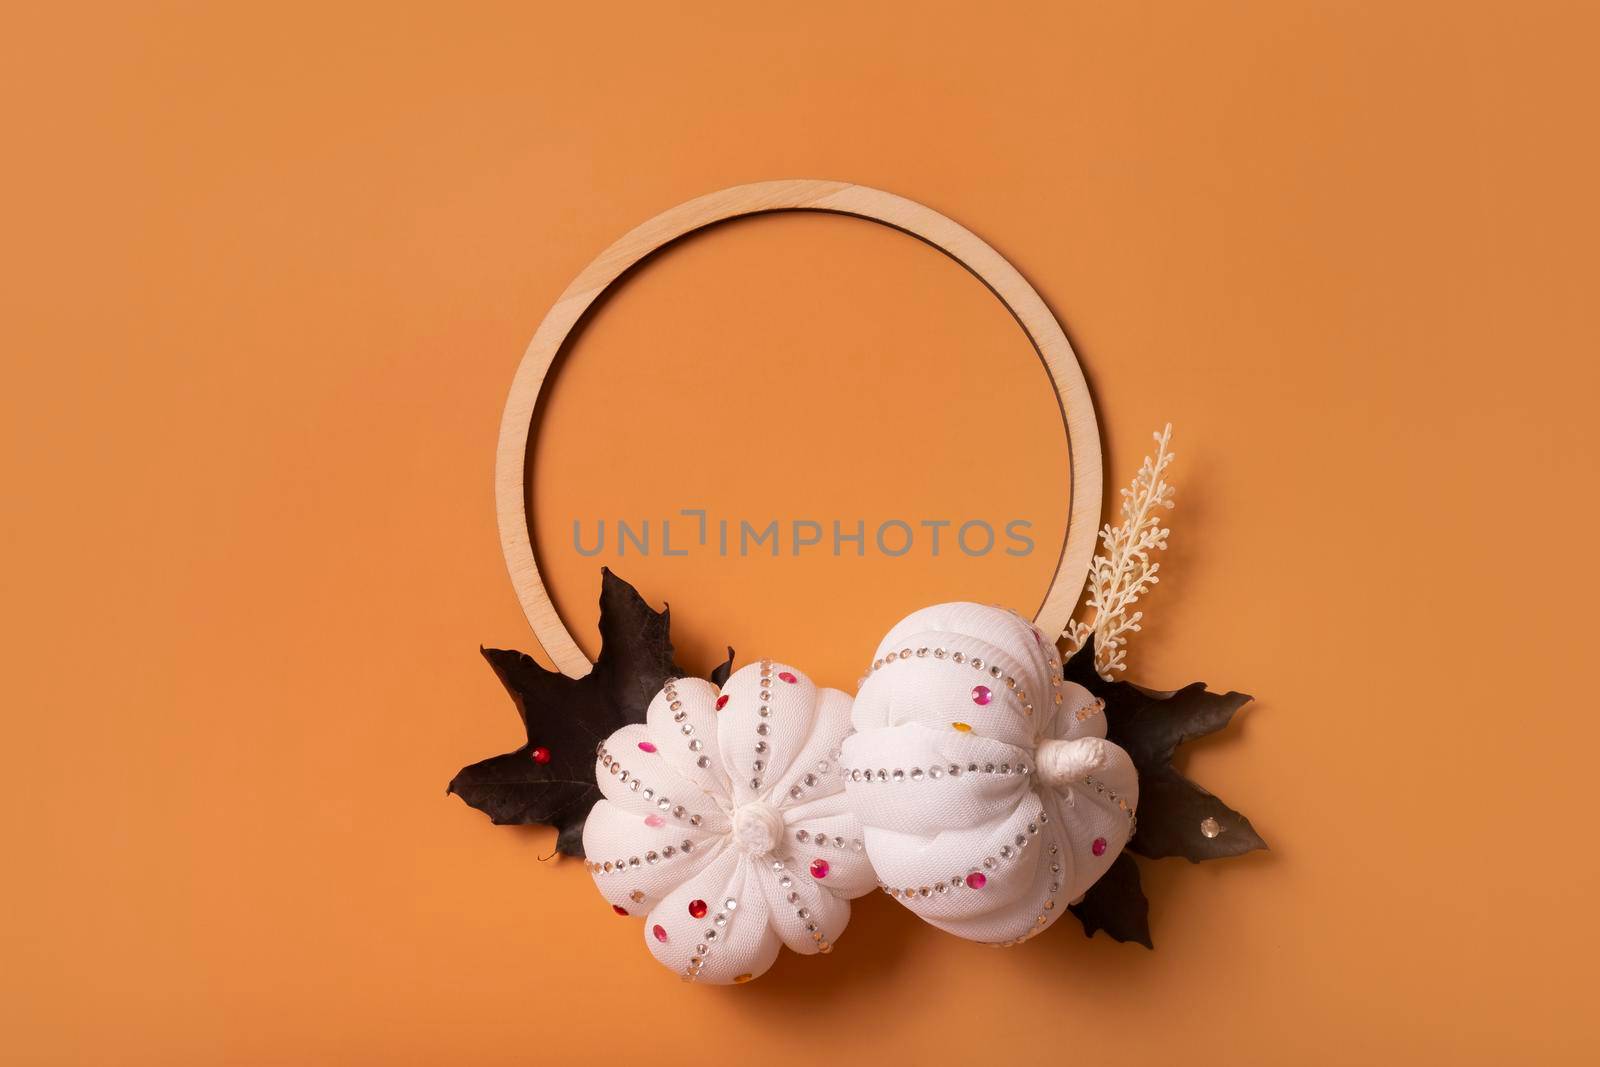 White decorative textile pumpkins with shiny stones and wooden frame for your text. Autumn harvest and thanksgiving day concept.